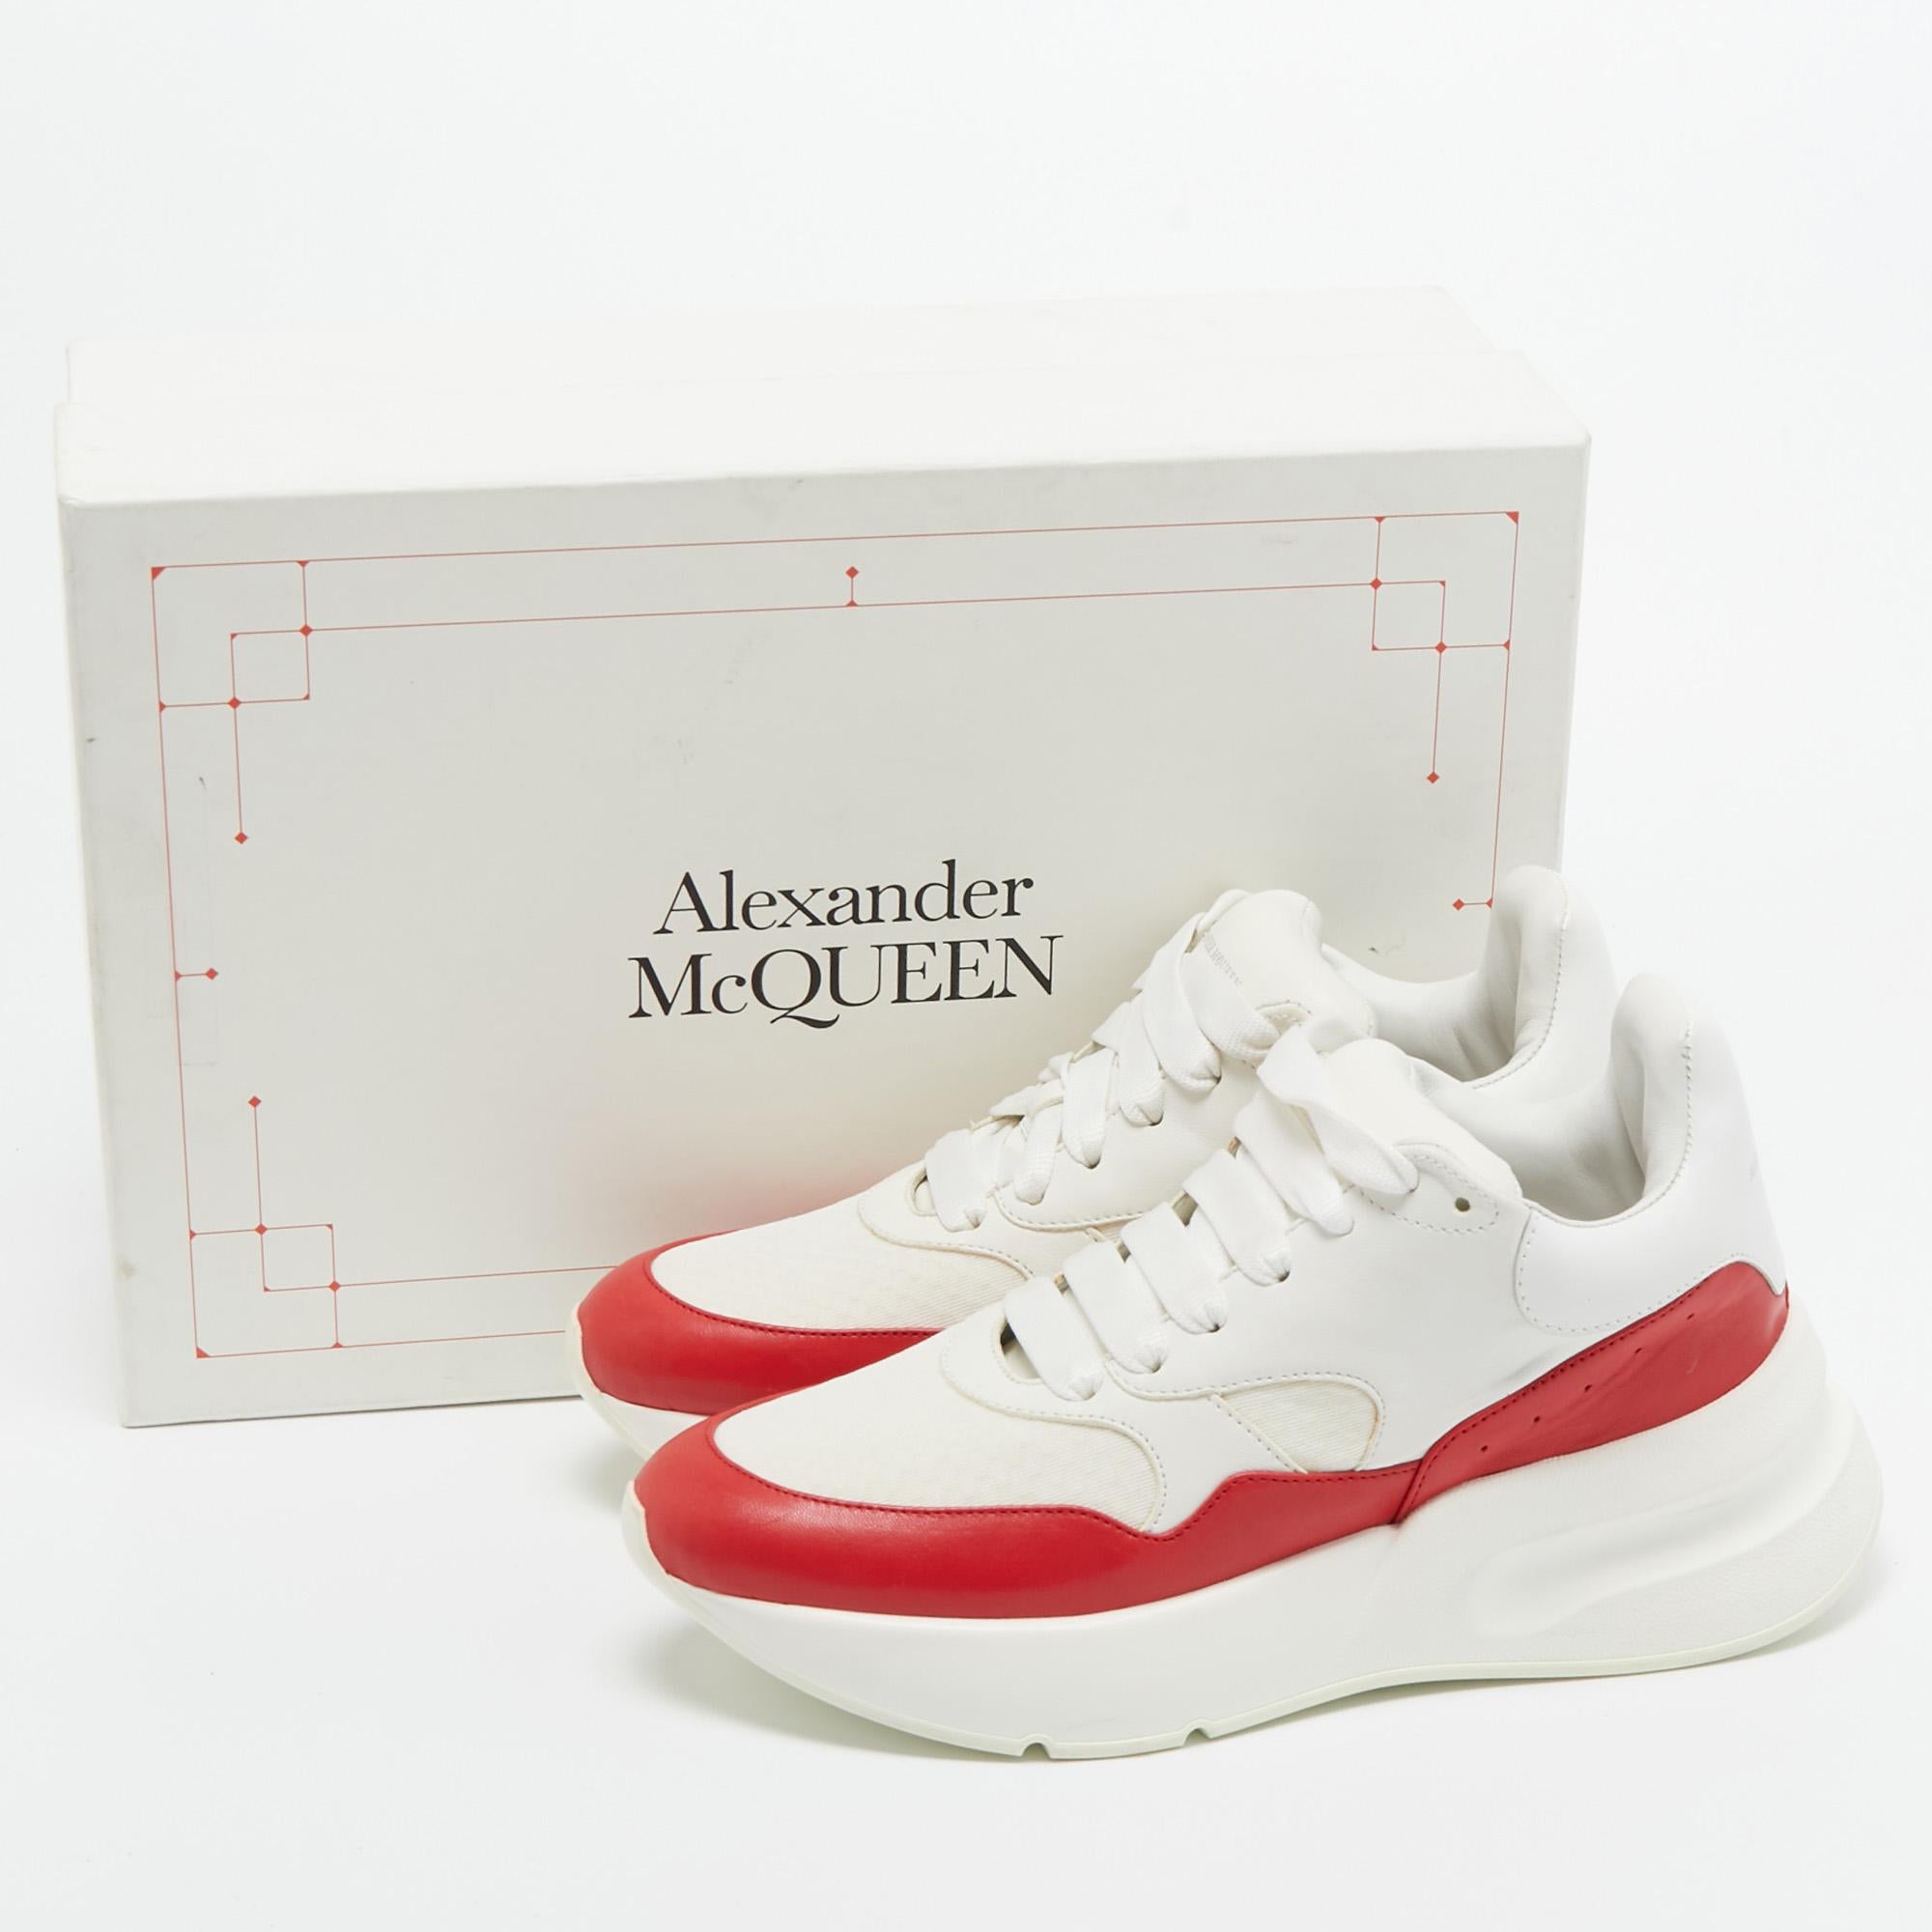 Alexander McQueen White/Red Leather and Canvas Larry Sneakers Size 38 5